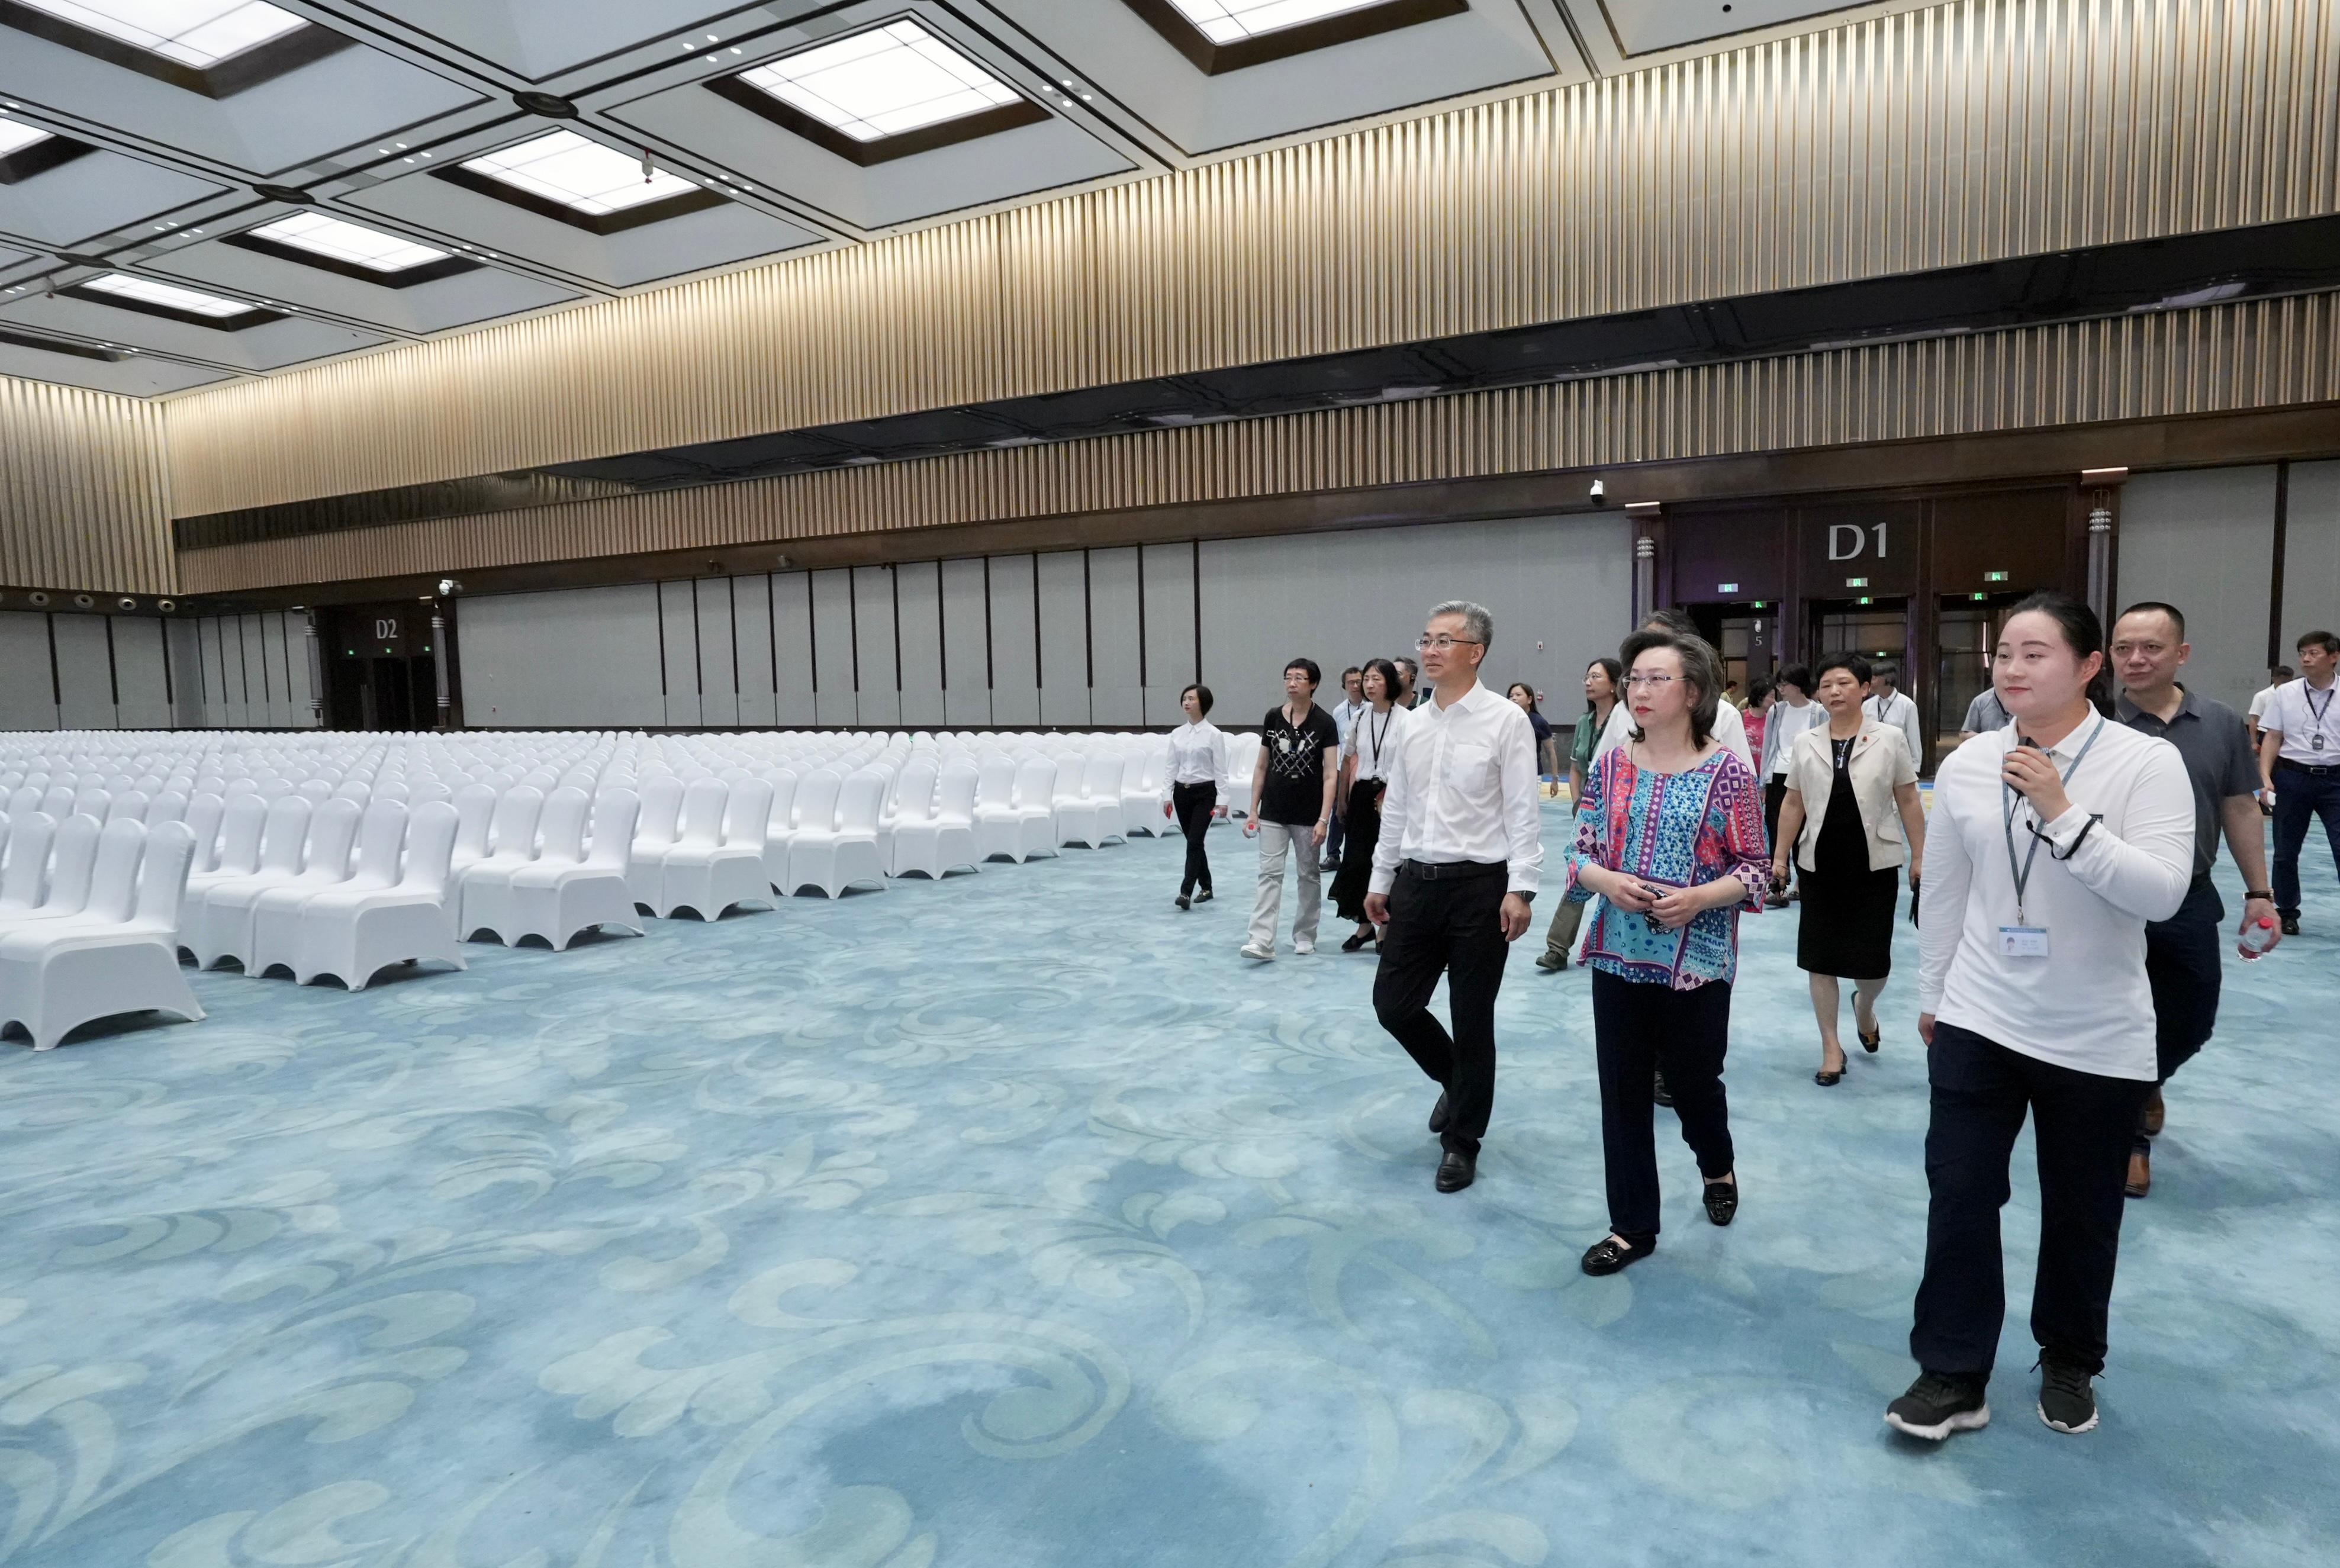 The Secretary for the Civil Service, Mrs Ingrid Yeung, and Permanent Secretaries and Heads of Departments today (June 29) visited the permanent site for the World Internet Conference in Wuzhen.